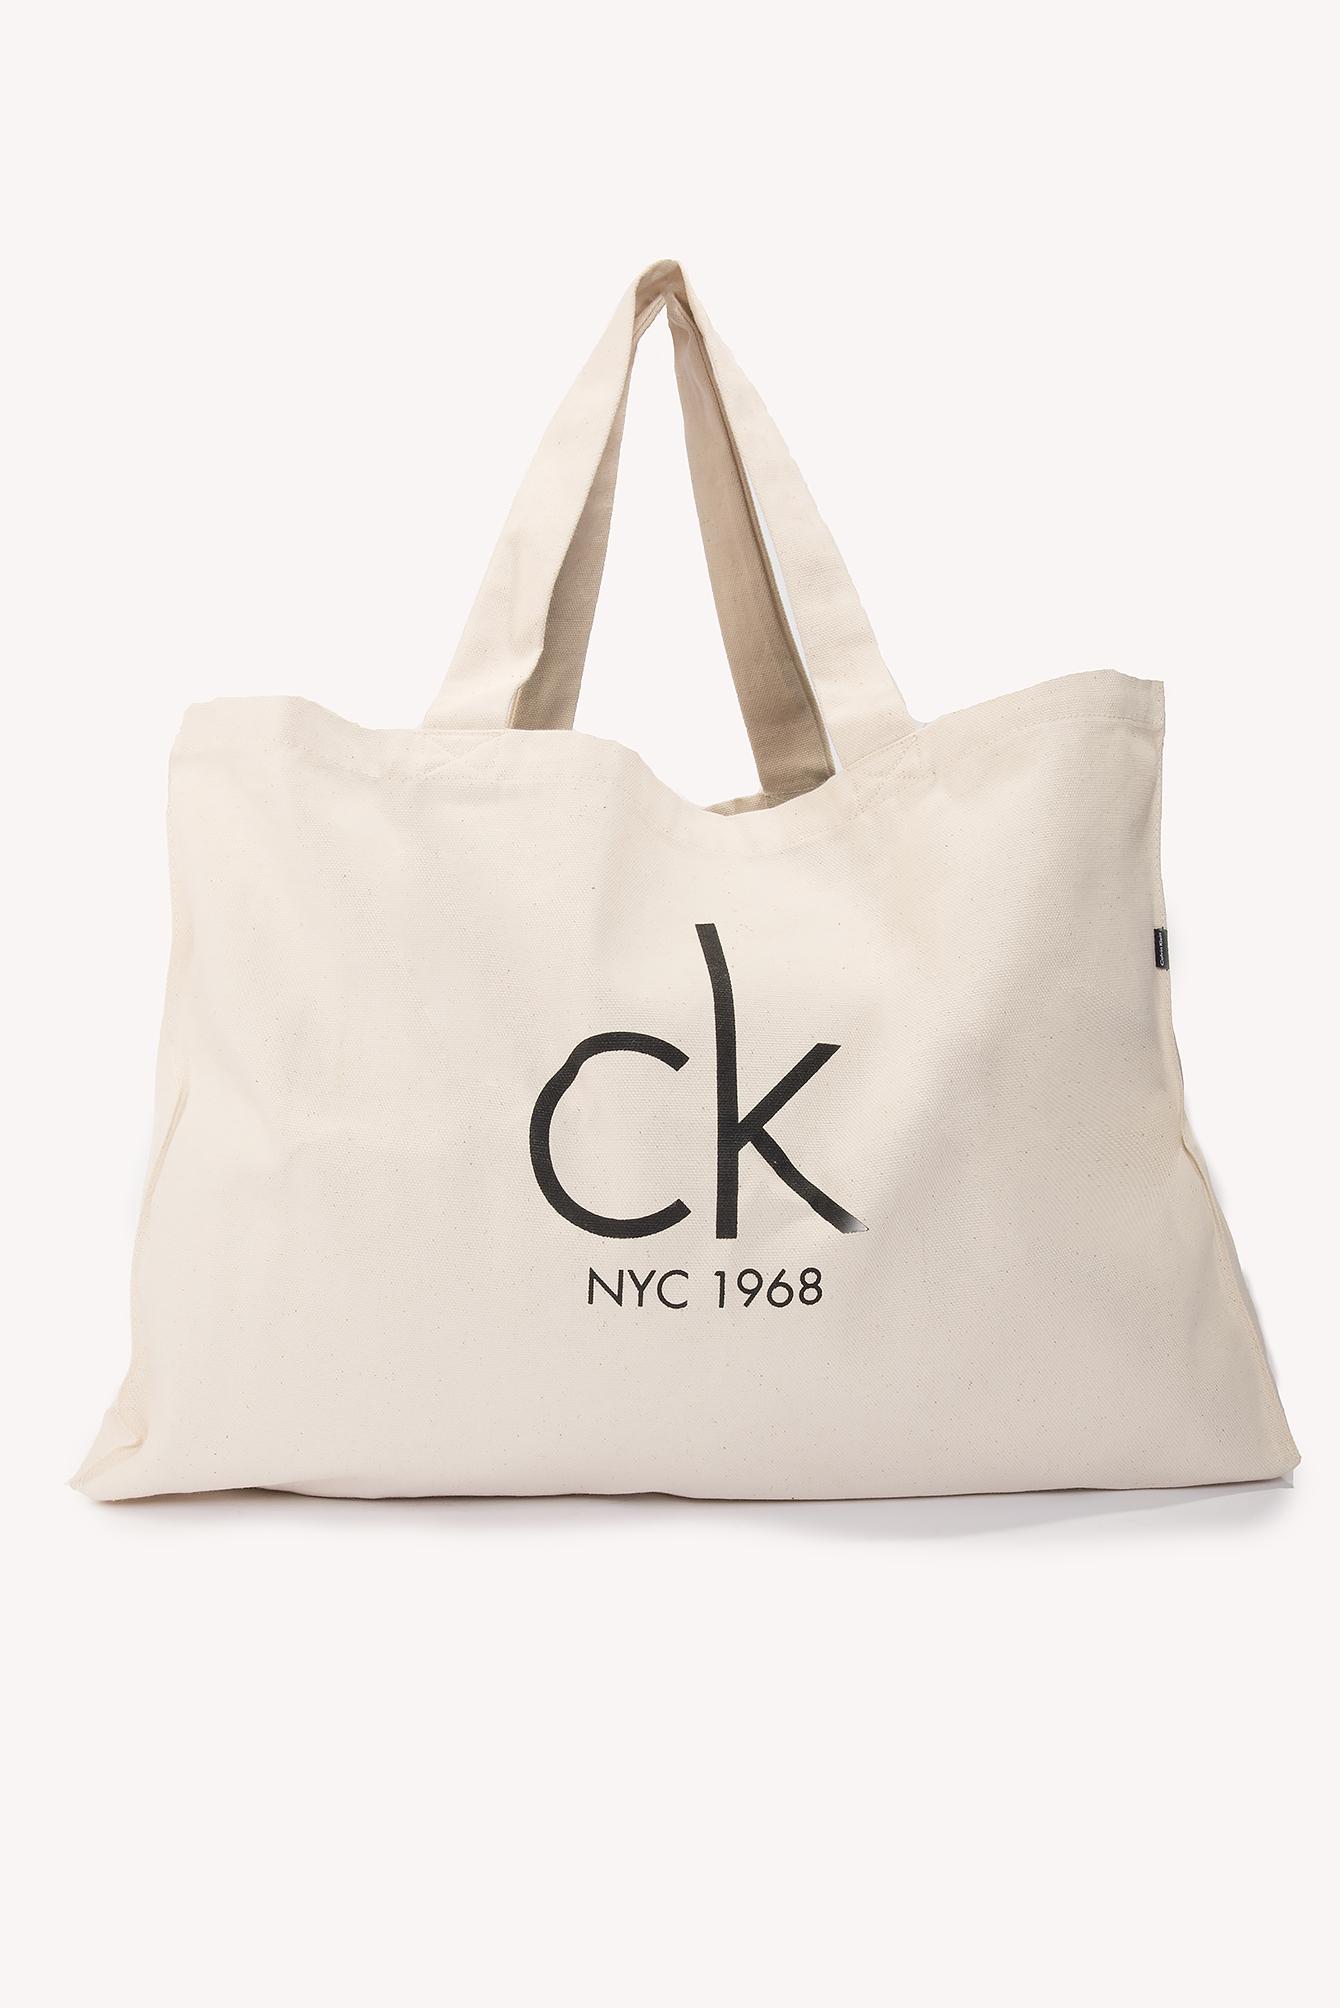 CALVIN KLEIN 205W39NYC Canvas Tote Bag in Natural - Lyst